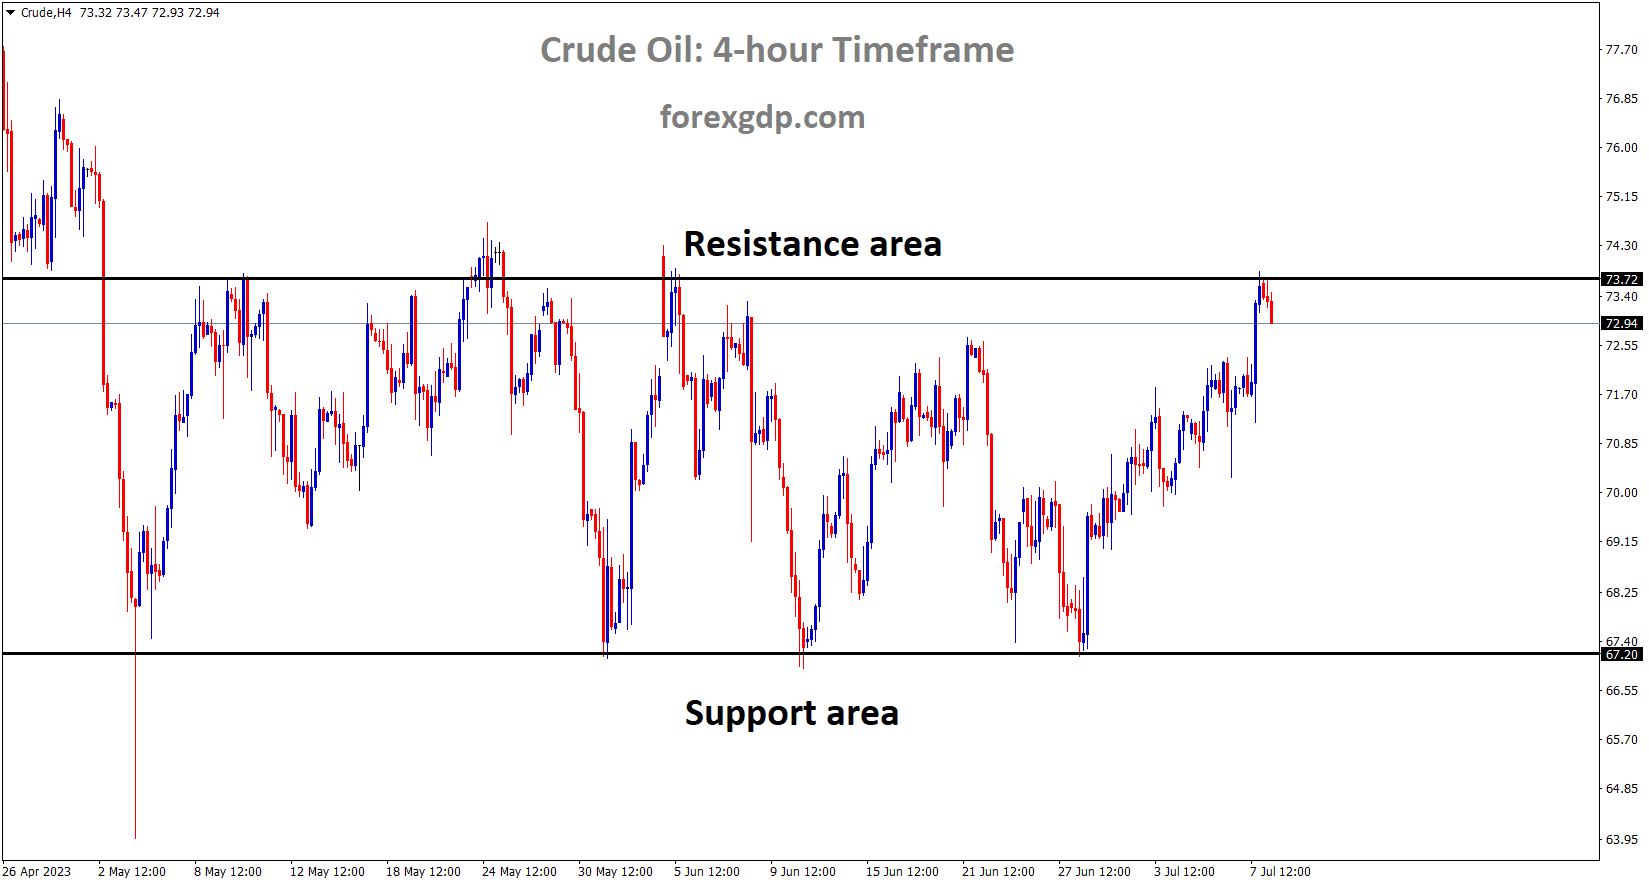 Crude Oil Price is moving in the Box pattern and the market has fallen from the resistance area of the pattern